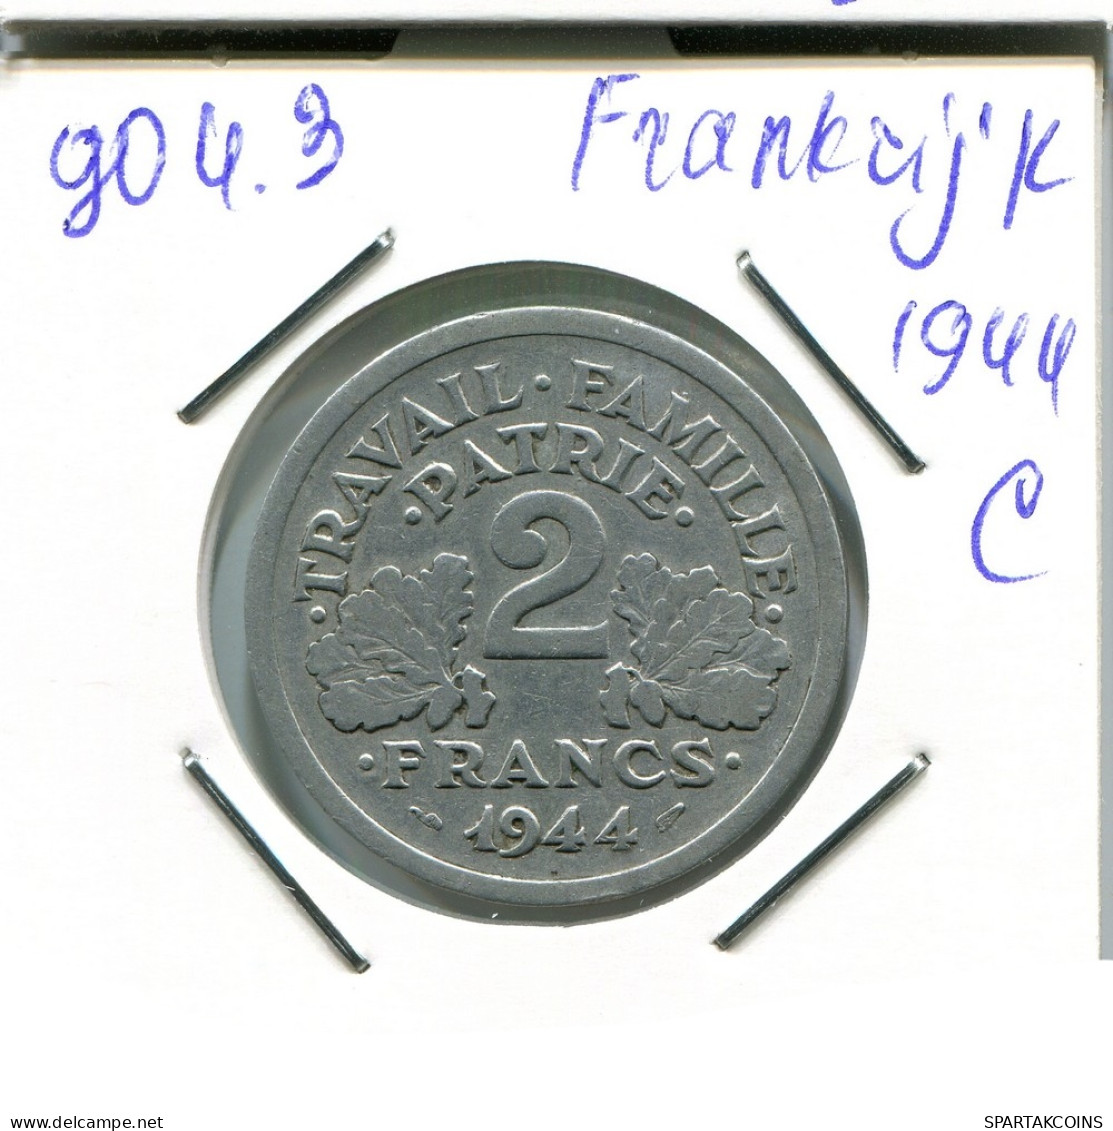 2 FRANCS 1944 C FRANCE French Coin #AN351 - 2 Francs